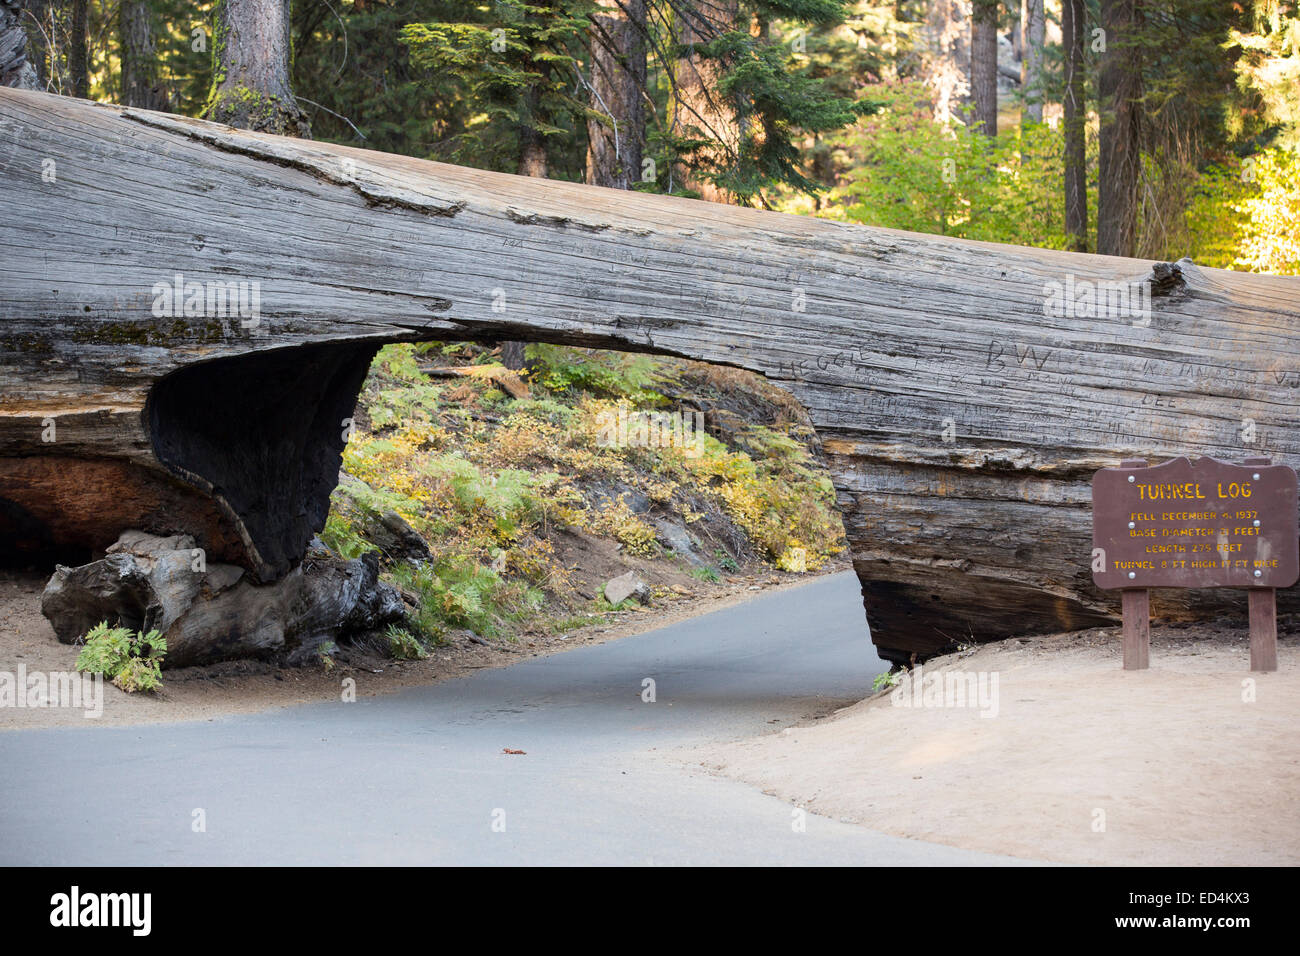 The Tunnel Log a fallen Giant Redwood, or Sequoia, Sequoiadendron giganteum, in Sequoia National Park, California, USA. Stock Photo